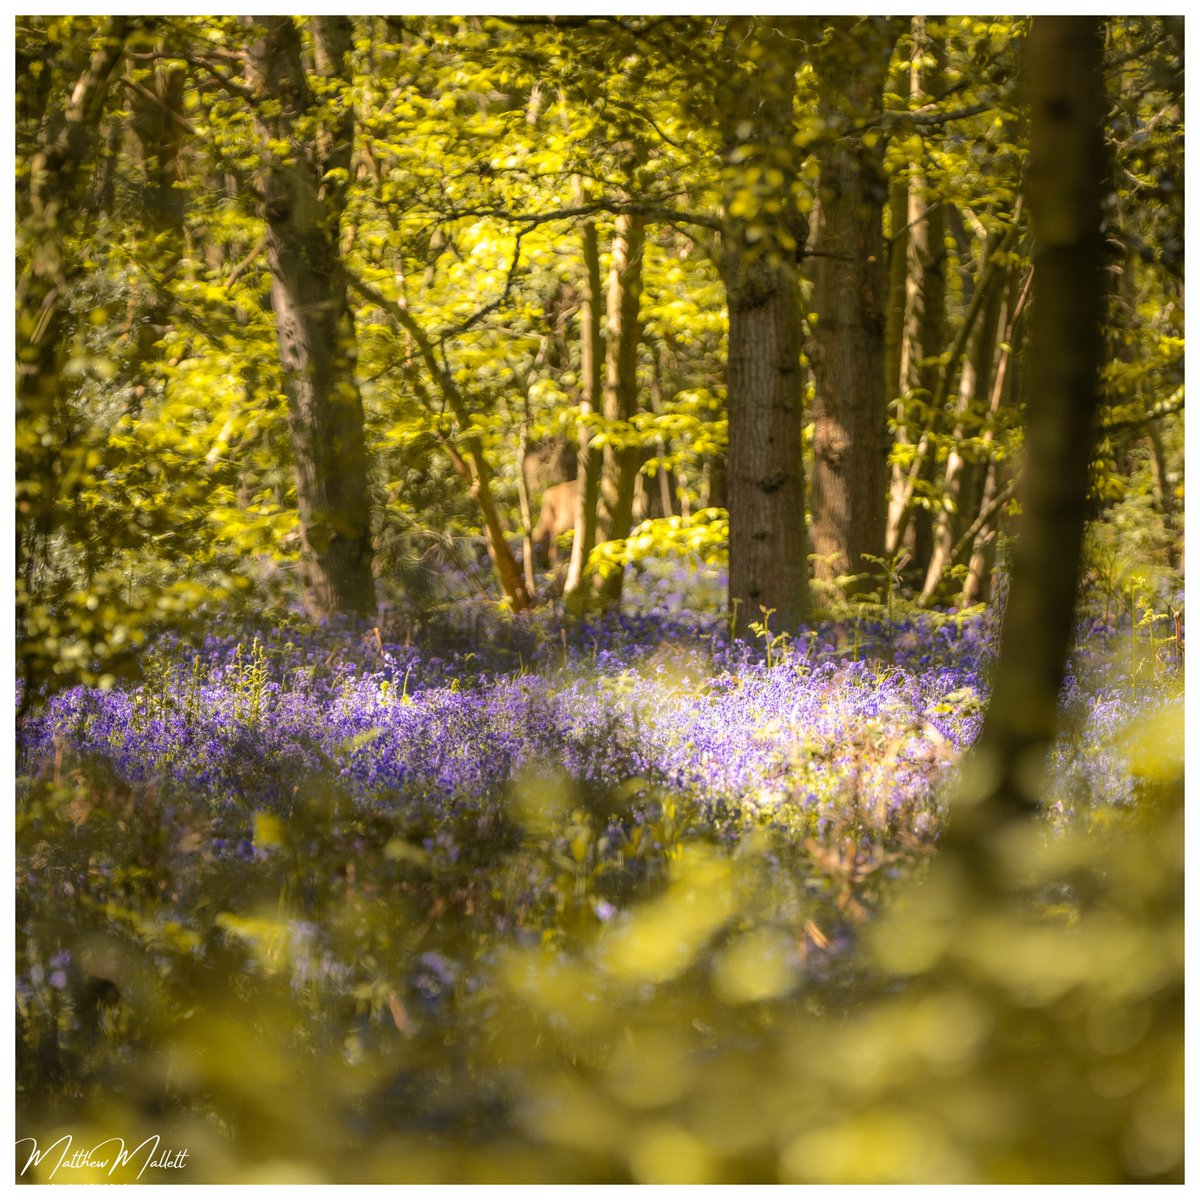 @AP_Magazine Weeley Hall Woods in Essex. May bank Holiday weekend